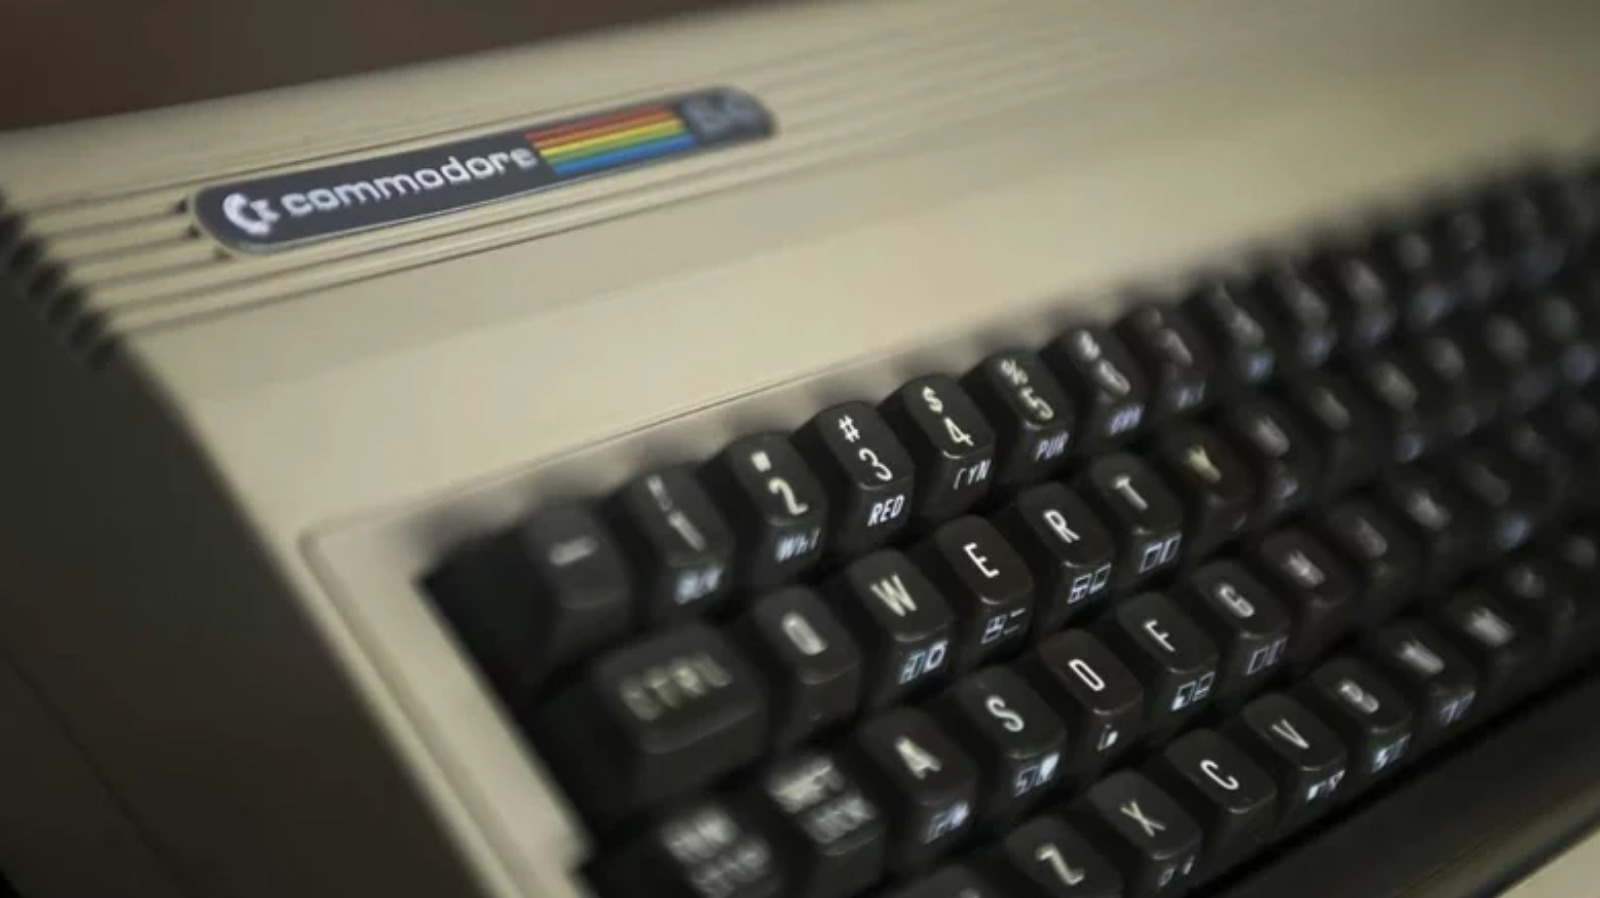 A (Nearly All) New Commodore 64